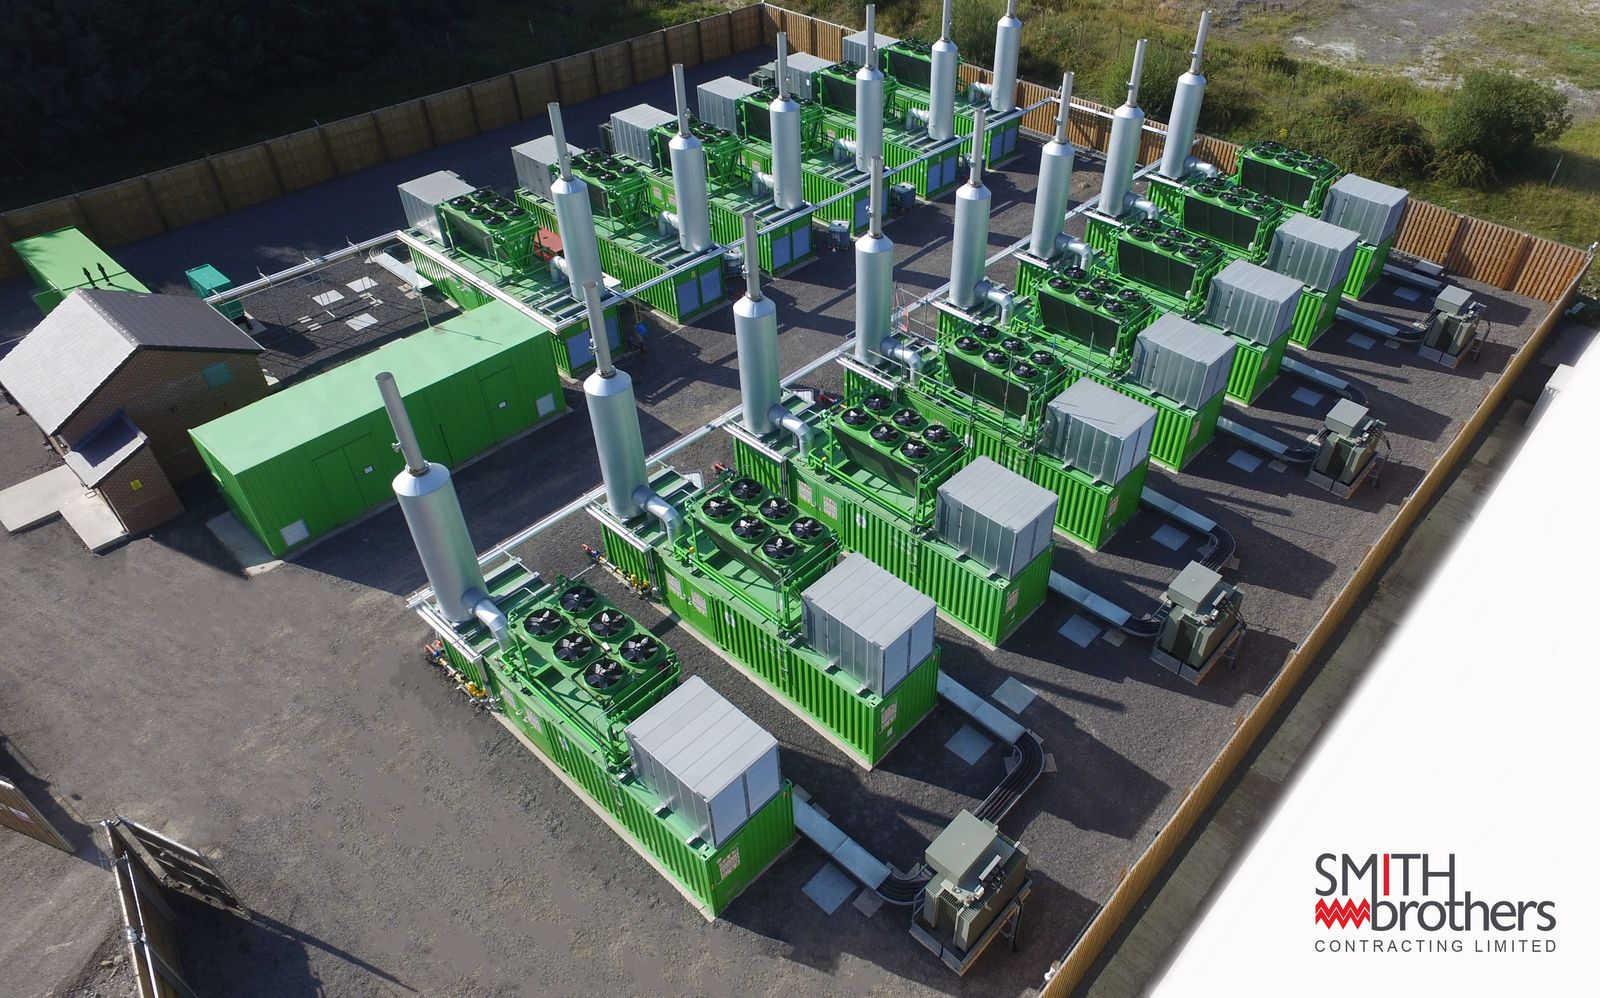 Smith Brothers to provide EPC services as part of £78m net zero flexible power generation scheme